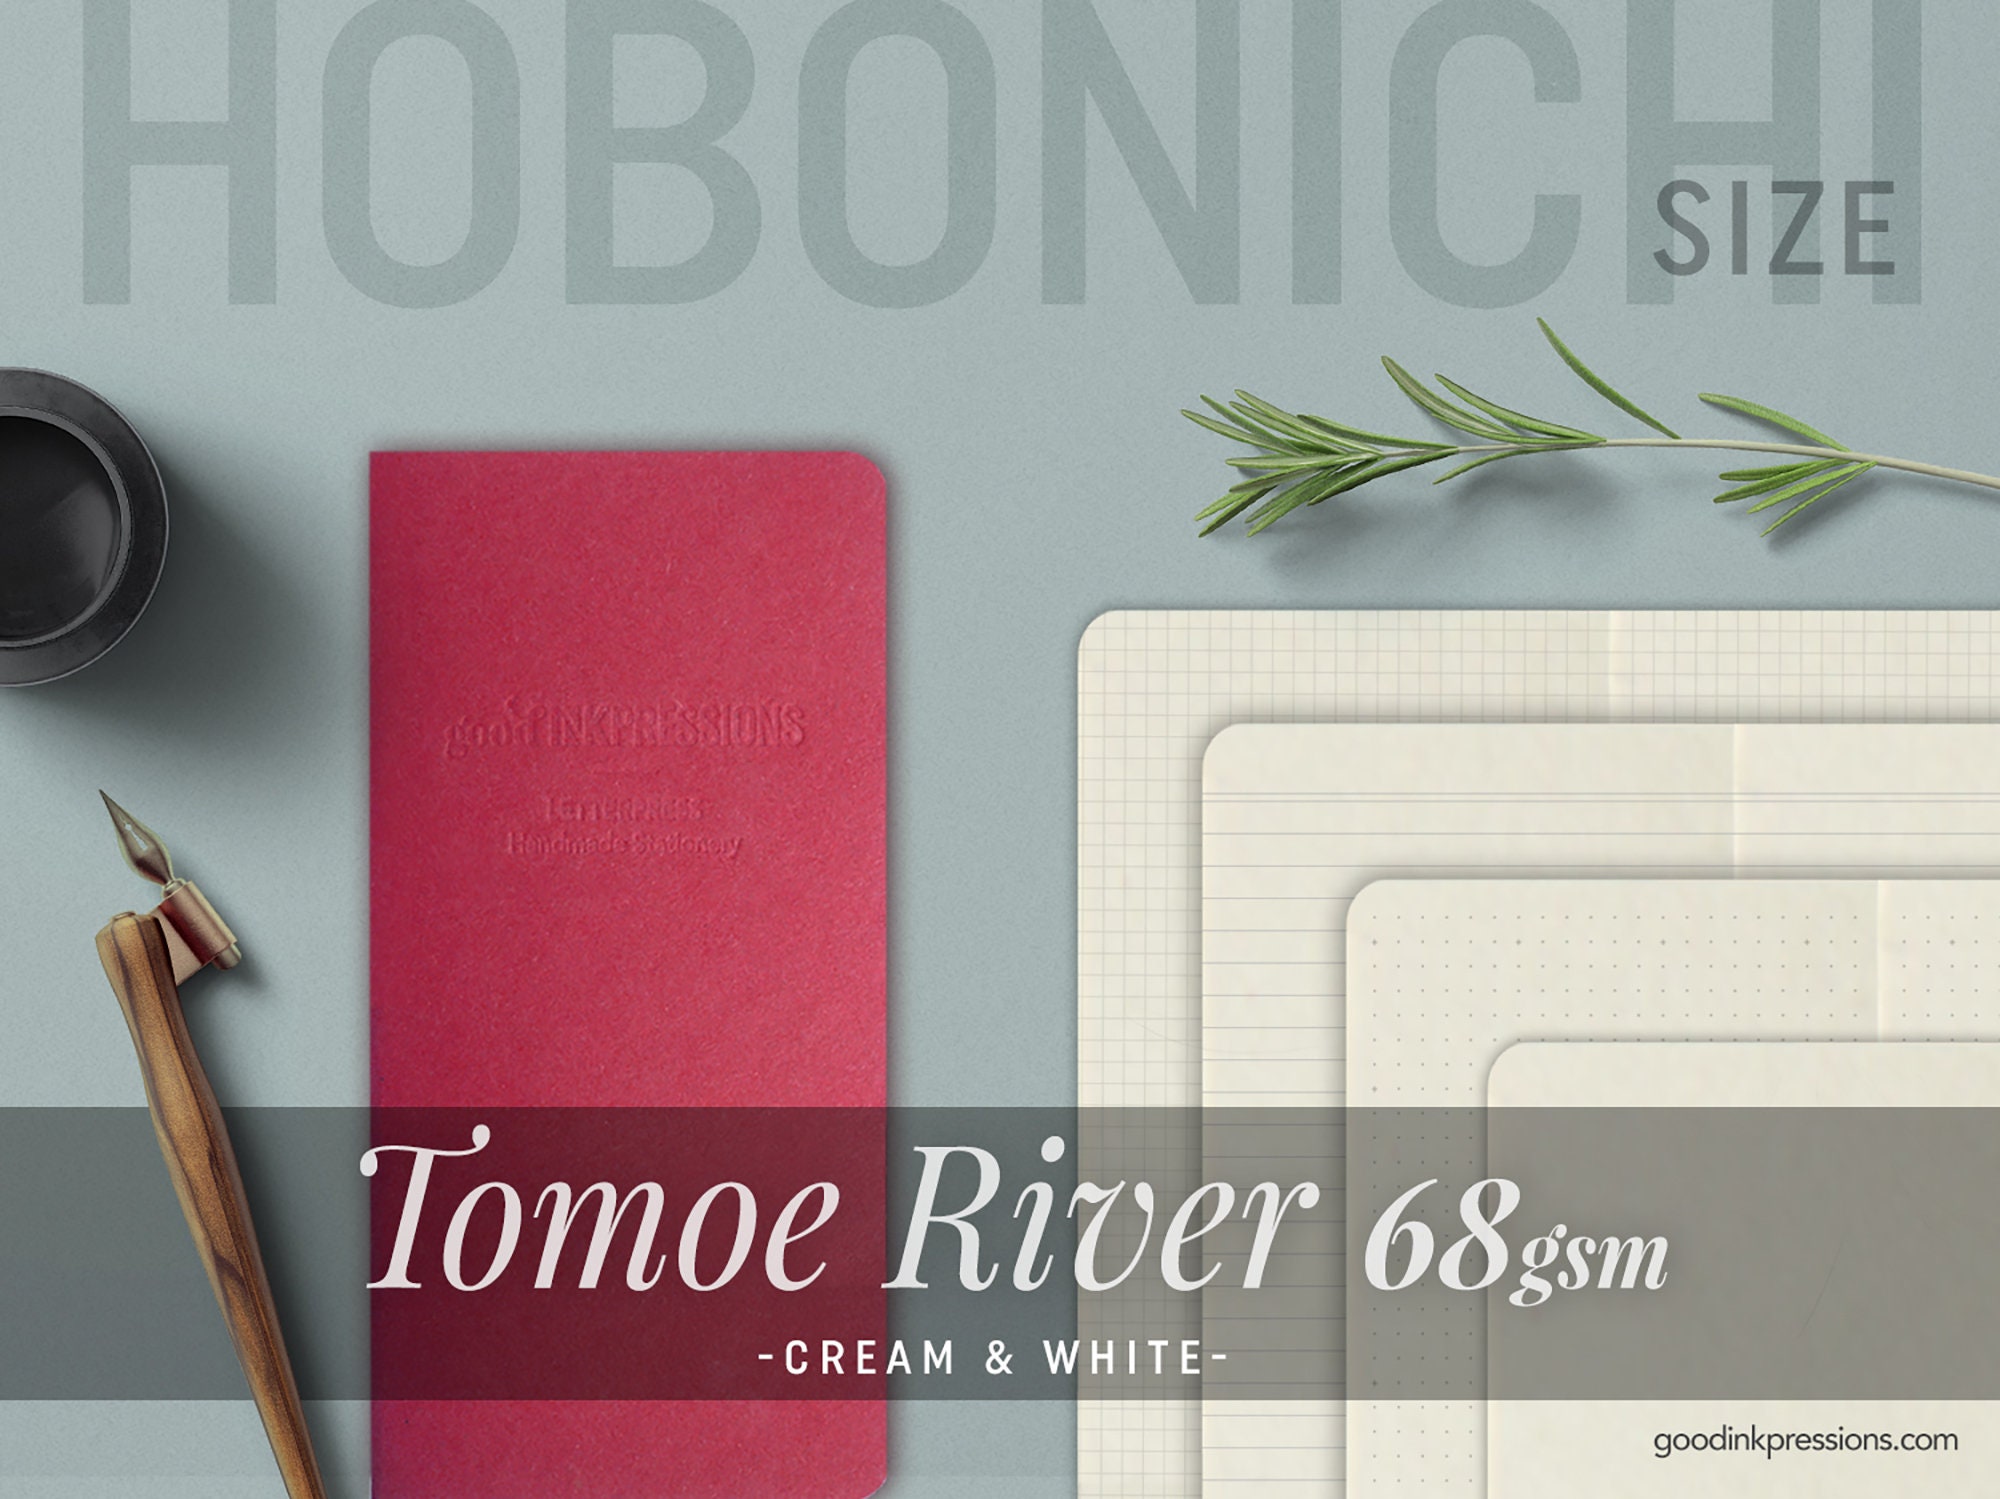 HOBONICHI Weeks Size - 120 Pages - TOMOE RIVER 68gsm, Cream & White, Midori  Inserts - Scrapbooking- Fountain Pen